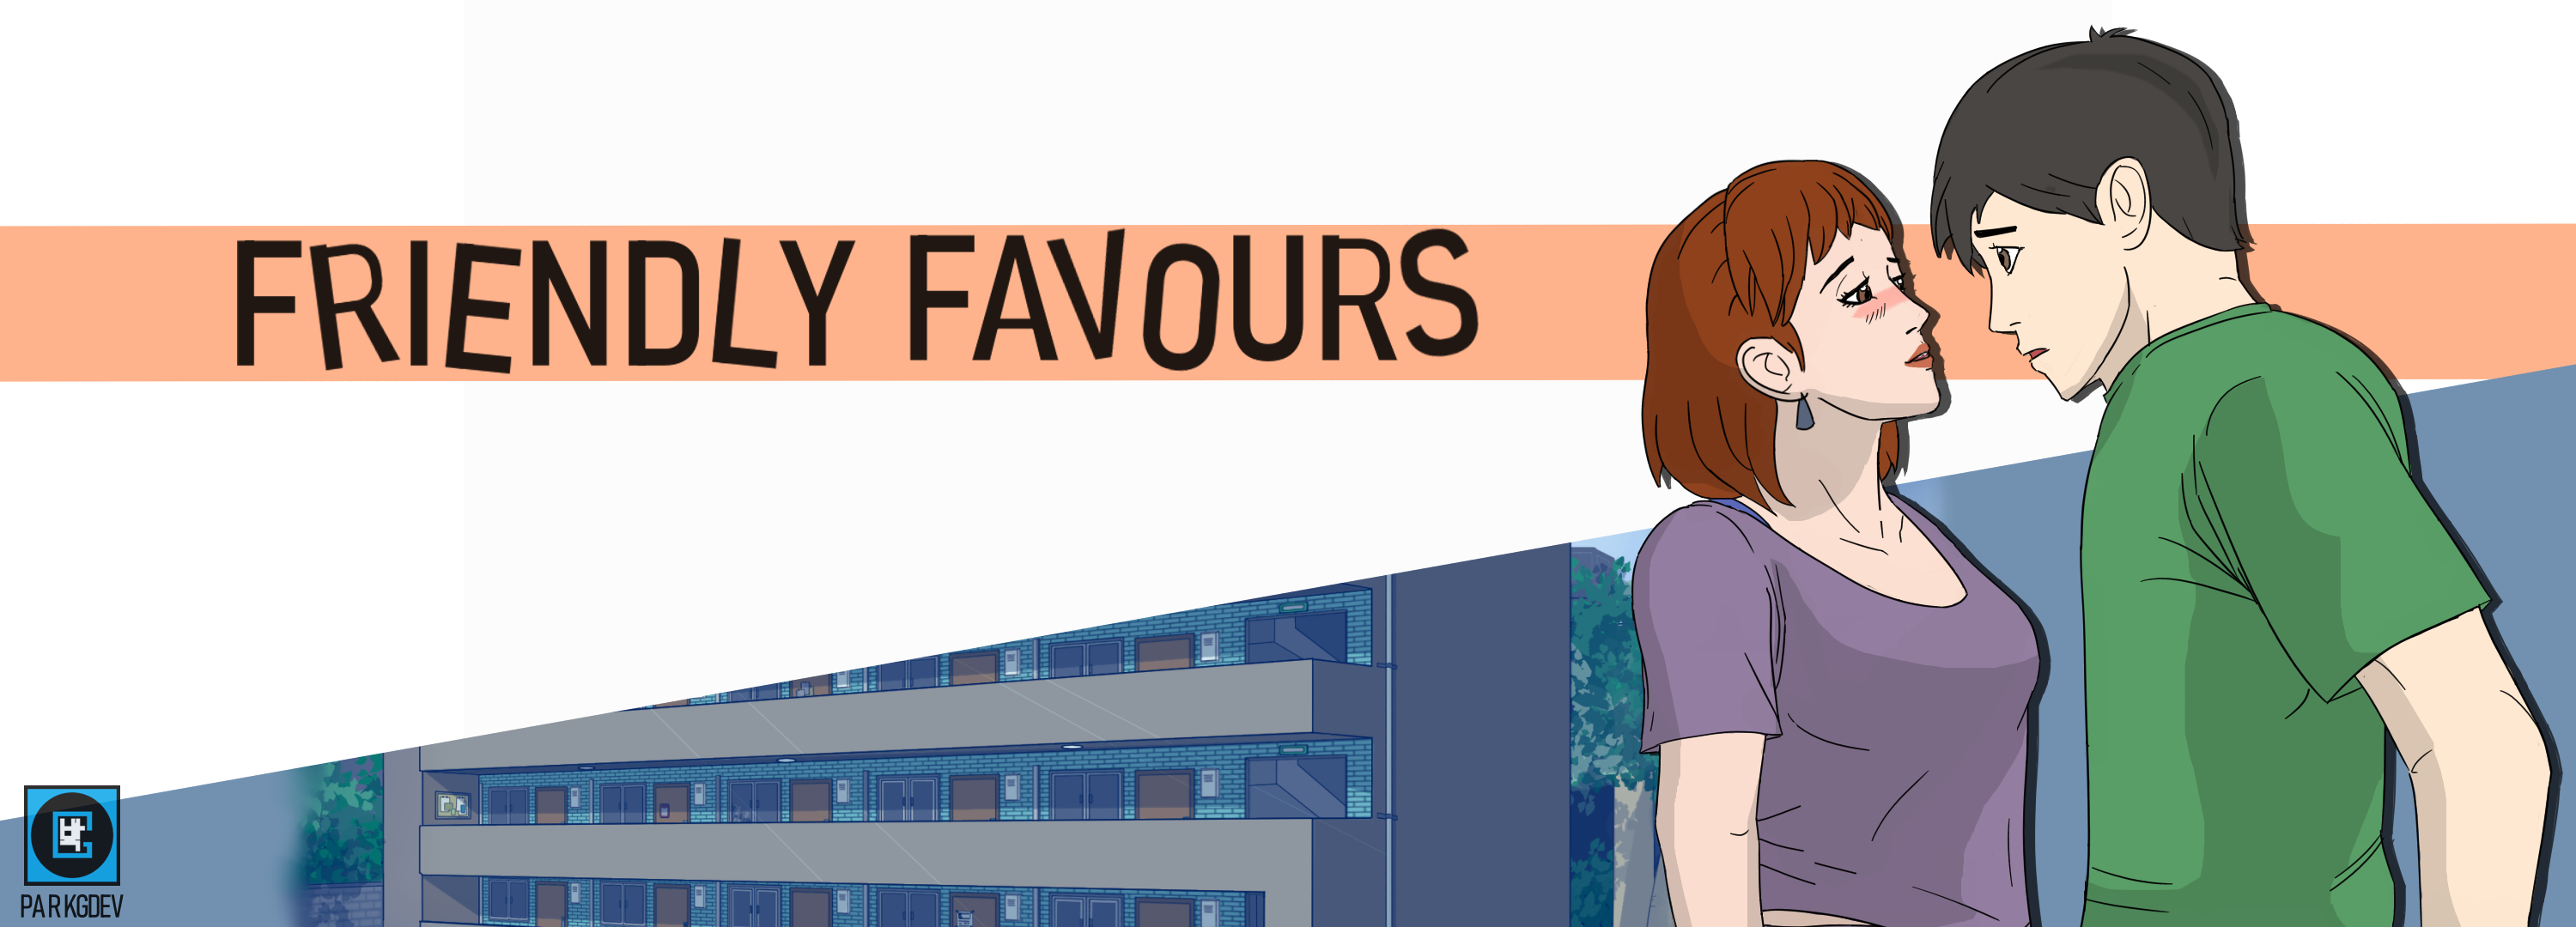 Heart City Stories EP 1: Friendly Favours